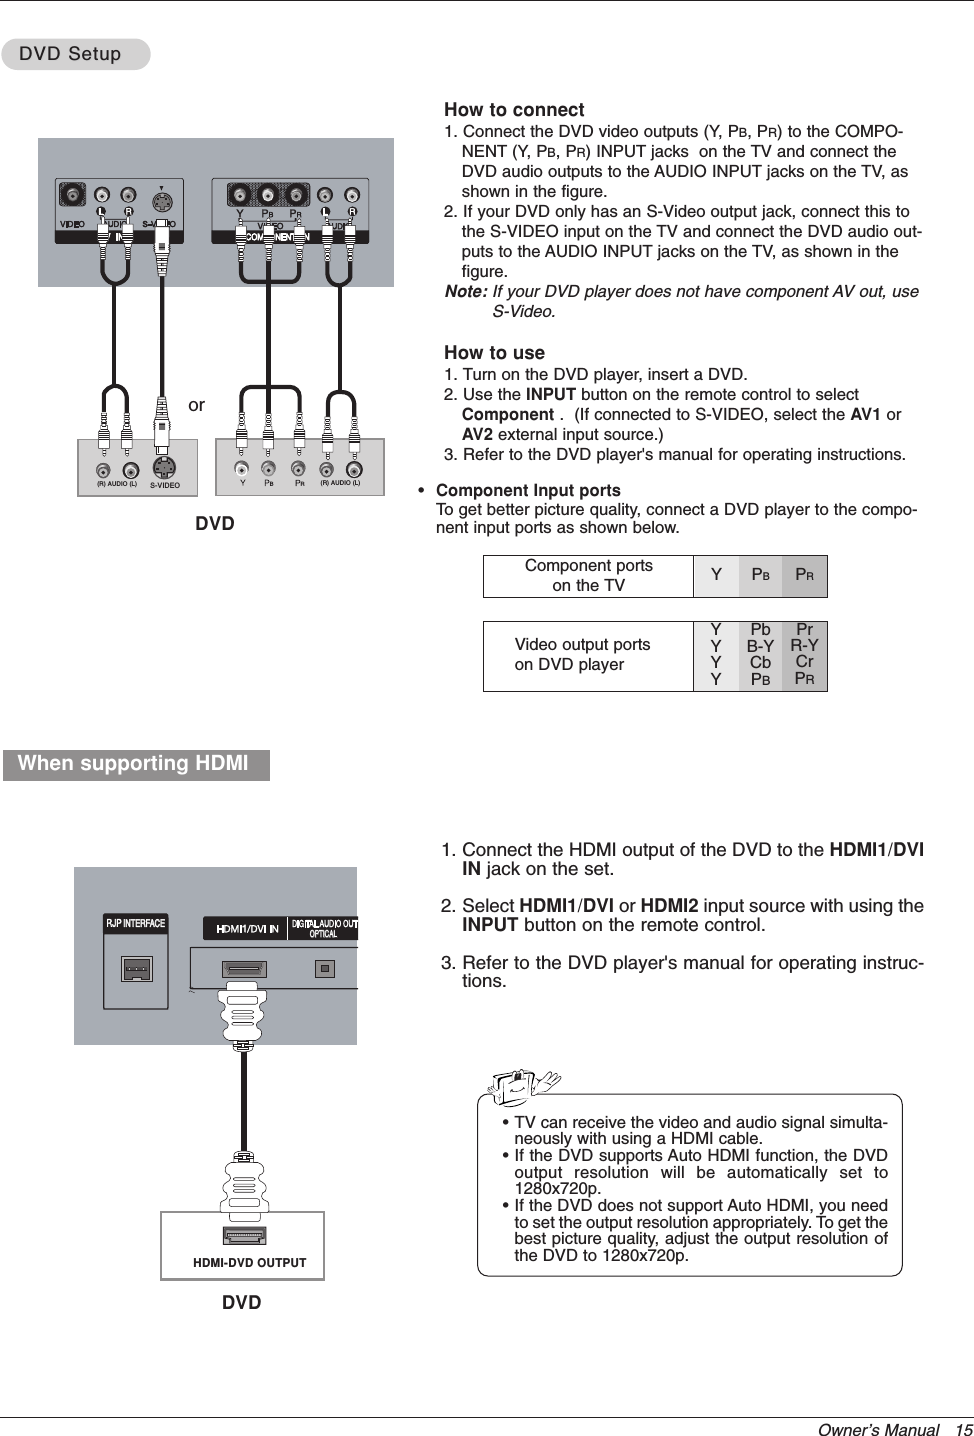 Owner’s Manual   15•Component Input portsTo get better picture quality, connect a DVD player to the compo-nent input ports as shown below.Component ports on the TV YPBPRVideo output ports on DVD playerYYYYPbB-YCbPBPrR-YCrPRHow to connect1. Connect the DVD video outputs (Y, PB, PR) to the COMPO-NENT (Y, PB, PR) INPUT jacks  on the TV and connect theDVD audio outputs to the AUDIO INPUT jacks on the TV, asshown in the figure.2. If your DVD only has an S-Video output jack, connect this tothe S-VIDEO input on the TV and connect the DVD audio out-puts to the AUDIO INPUT jacks on the TV, as shown in thefigure.Note: If your DVD player does not have component AV out, useS-Video.How to use1. Turn on the DVD player, insert a DVD.2. Use the INPUT button on the remote control to selectComponent .  (If connected to S-VIDEO, select the AV1 orAV2 external input source.)3. Refer to the DVD player&apos;s manual for operating instructions.DVD SetupDVD Setup(R) AUDIO (L)S-VIDEOBR(R) AUDIO (L)INTERFACESERVICE ONLYOPTICAL1 DVDorHDMI-DVD OUTPUTINTERFACEINTERFACESERVICE ONLYOPTICALOPTICAL1 1 When supporting HDMI1. Connect the HDMI output of the DVD to the HDMI1/DVIIN jack on the set.2. Select HDMI1/DVI or HDMI2 input source with using theINPUT button on the remote control.3. Refer to the DVD player&apos;s manual for operating instruc-tions.•TV can receive the video and audio signal simulta-neously with using a HDMI cable.•If the DVD supports Auto HDMI function, the DVDoutput resolution will be automatically set to1280x720p.•If the DVD does not support Auto HDMI, you needto set the output resolution appropriately. To get thebest picture quality, adjust the output resolution ofthe DVD to 1280x720p.DVD